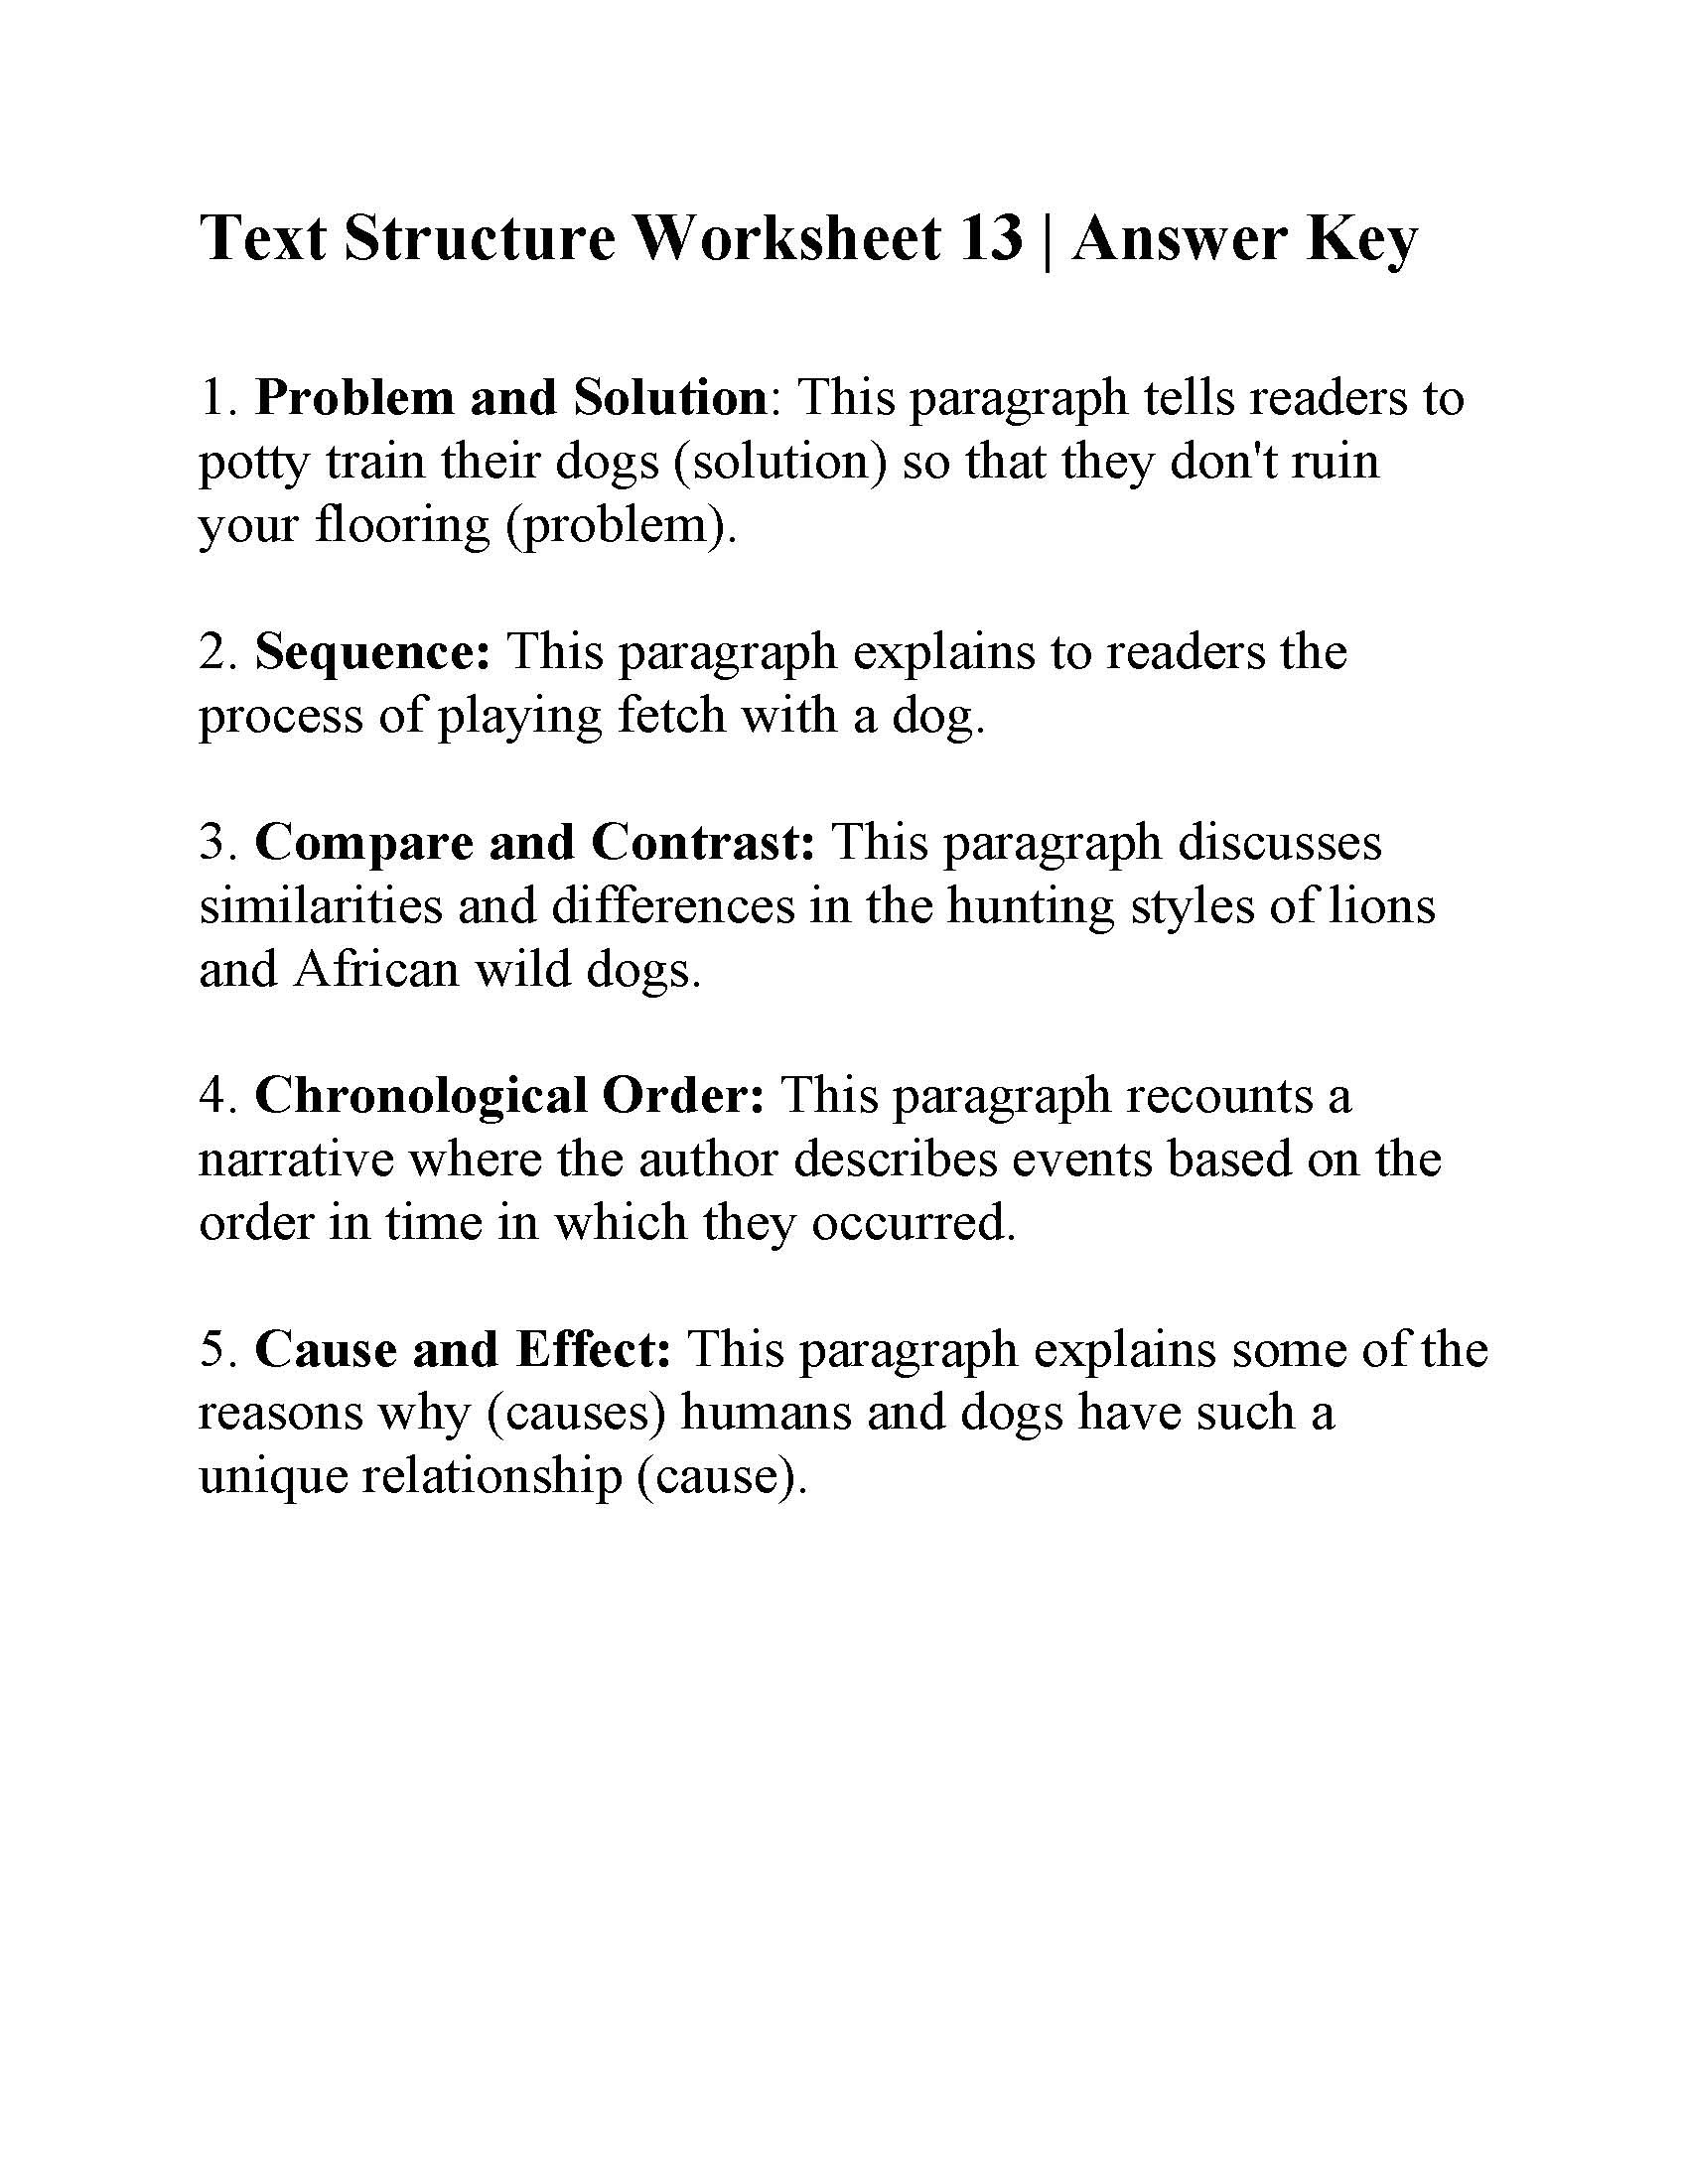 Text Structure Worksheet 4th Grade Text Structure Worksheet 13